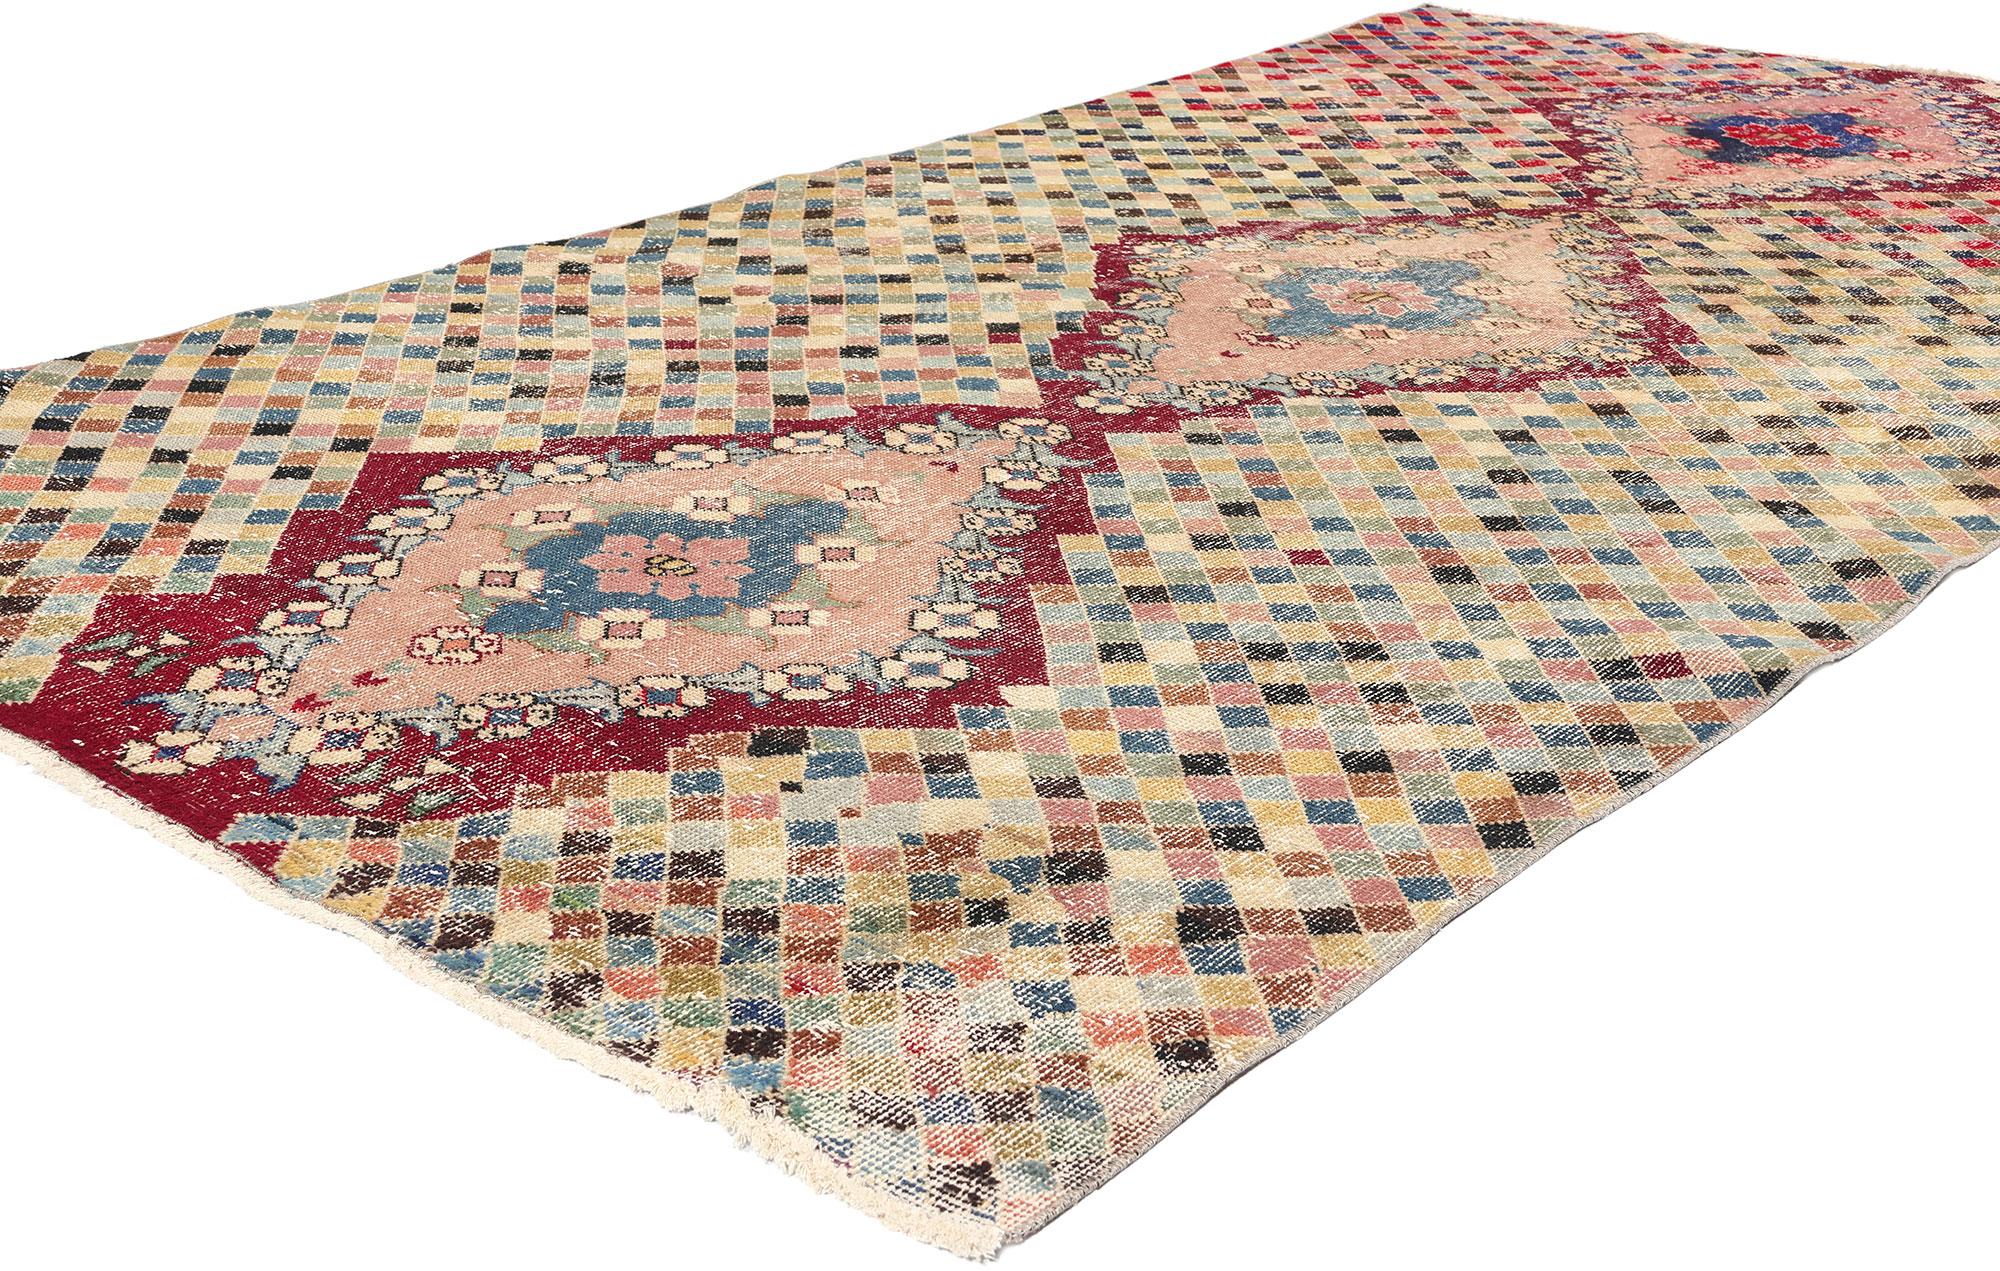 53336 Zeki Muren Distressed Vintage Turkish Sivas Rug, 04'11 x 09'03. Nestled within the peaceful landscapes of Turkey's Sivas region, Zeki Muren Turkish Sivas rugs celebrate the legacy of the esteemed Turkish singer who continues to inspire.